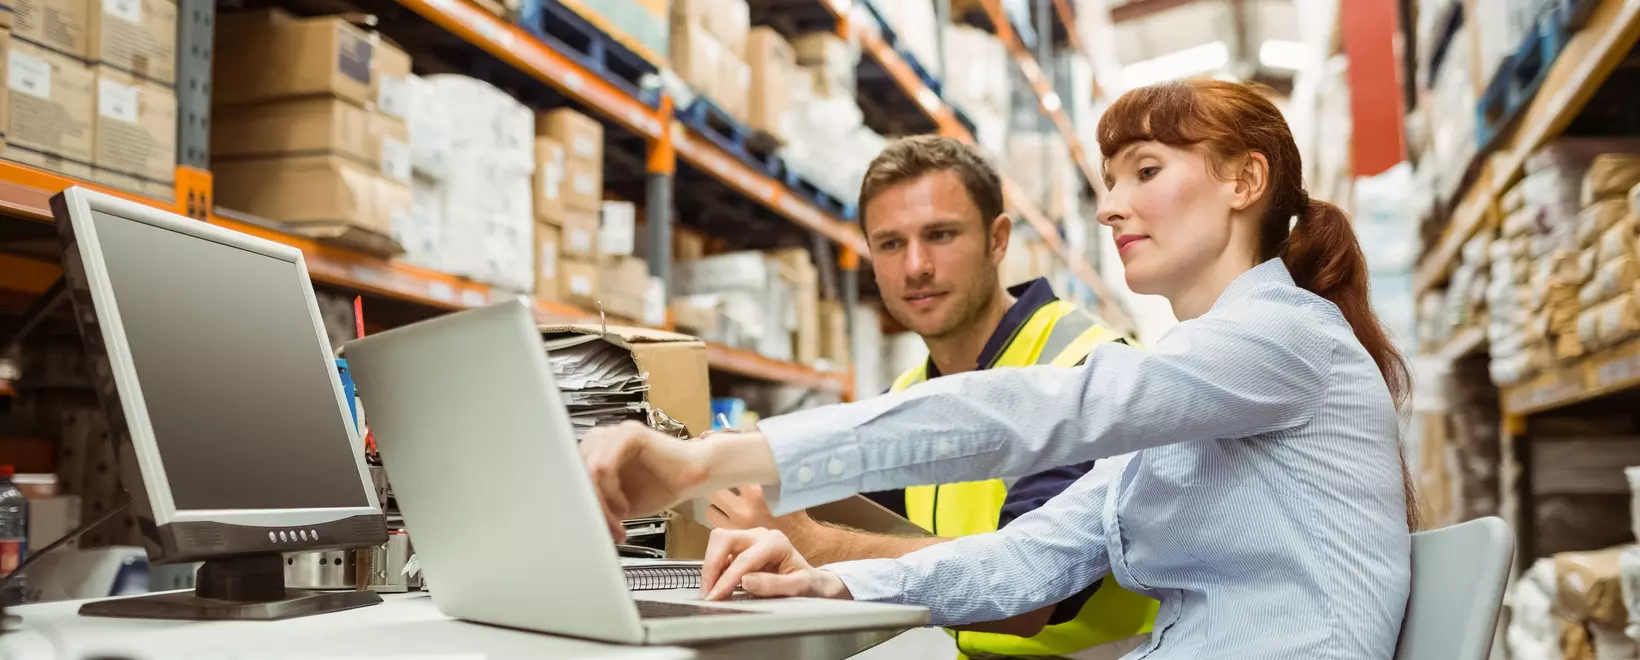 2 people doing inventory management during peak season in a warehouse